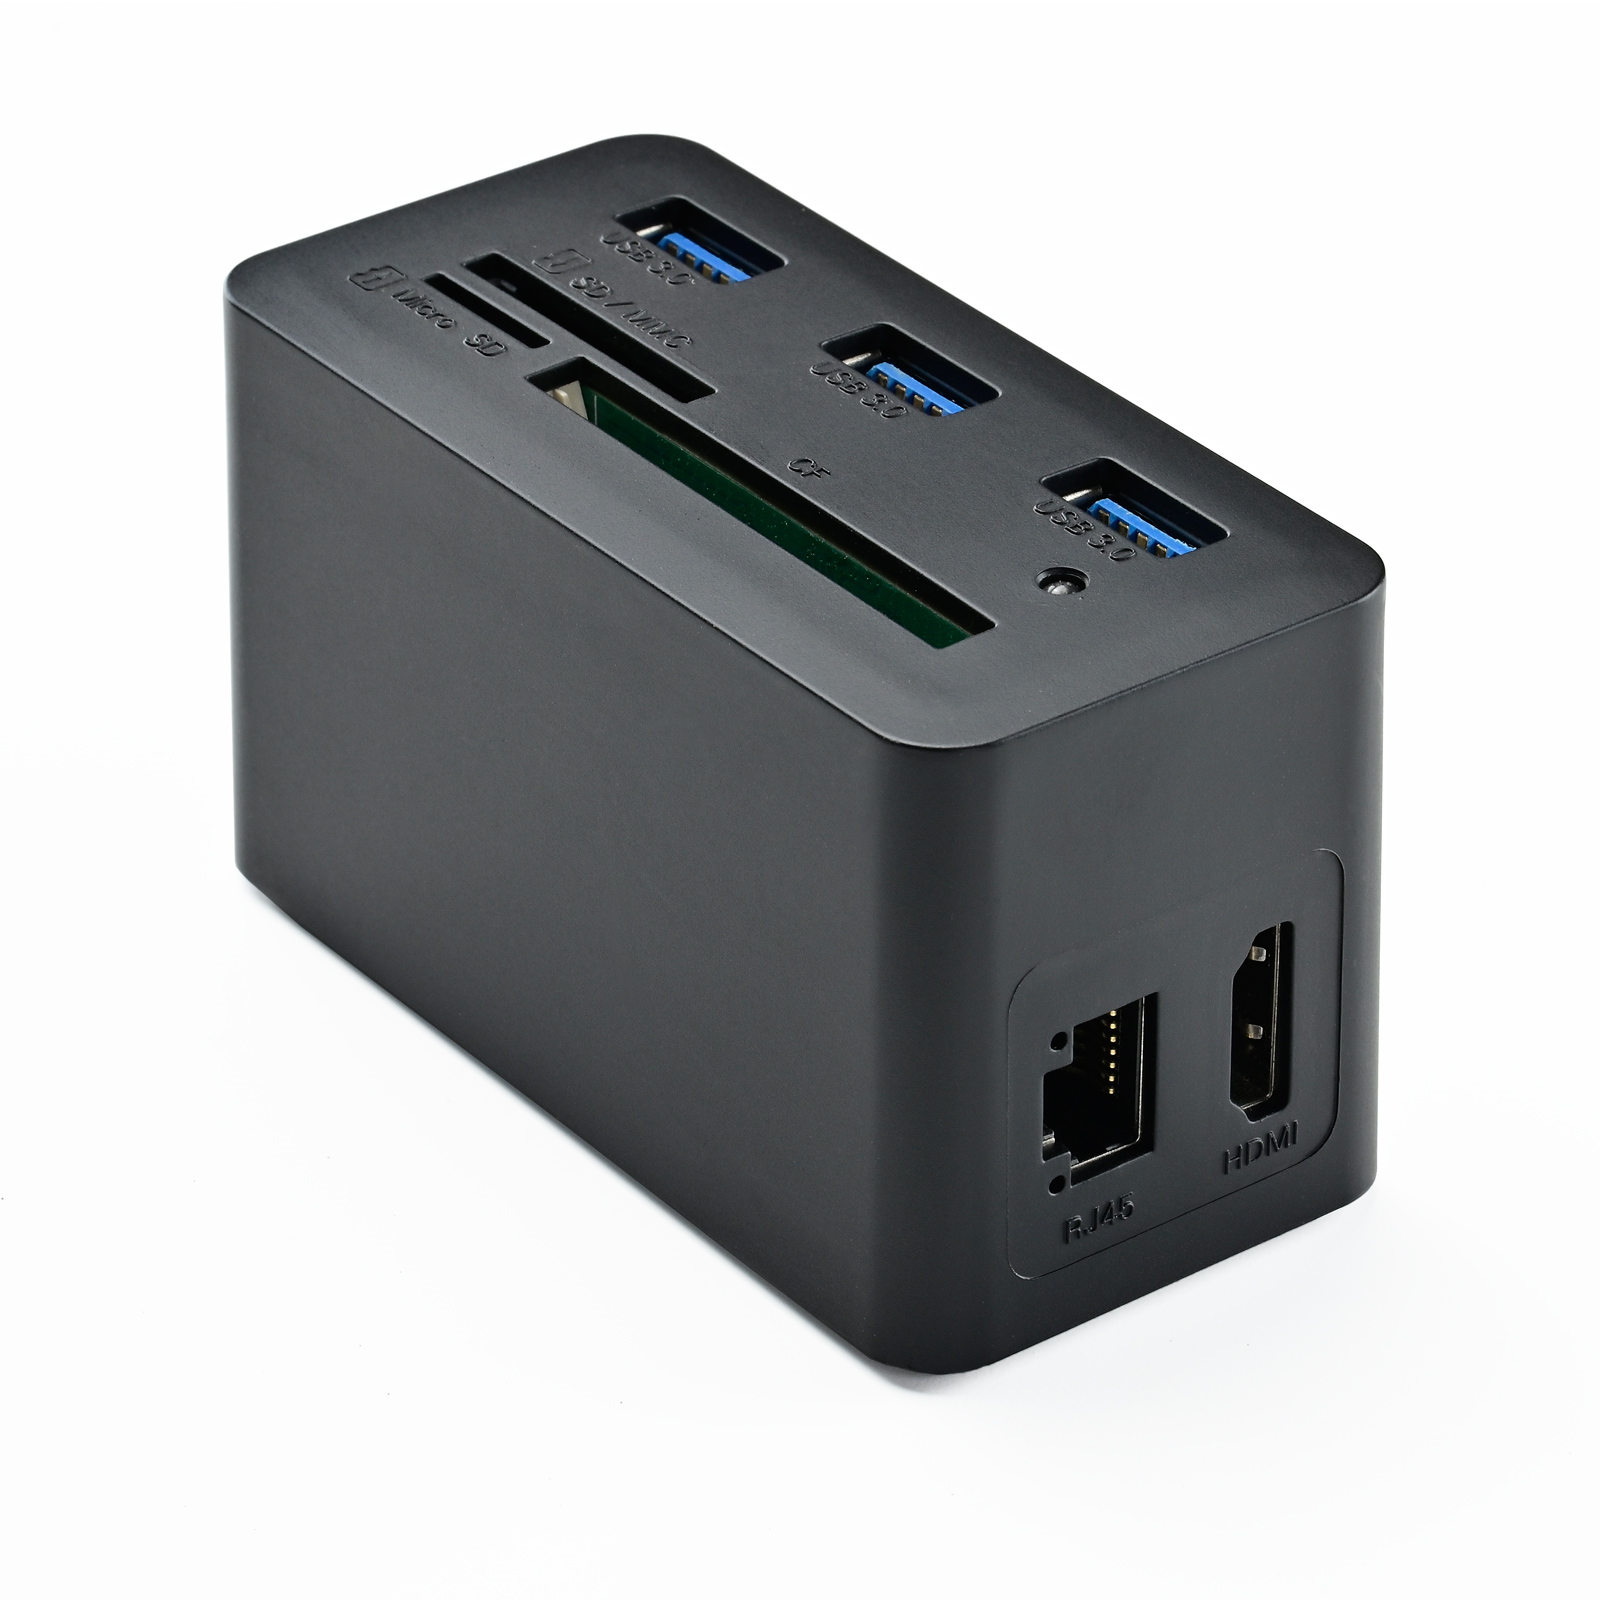 All-in-one USB C to USB 3.0 Hub Combo with Card Reader, HDMI, Ethernet& PD